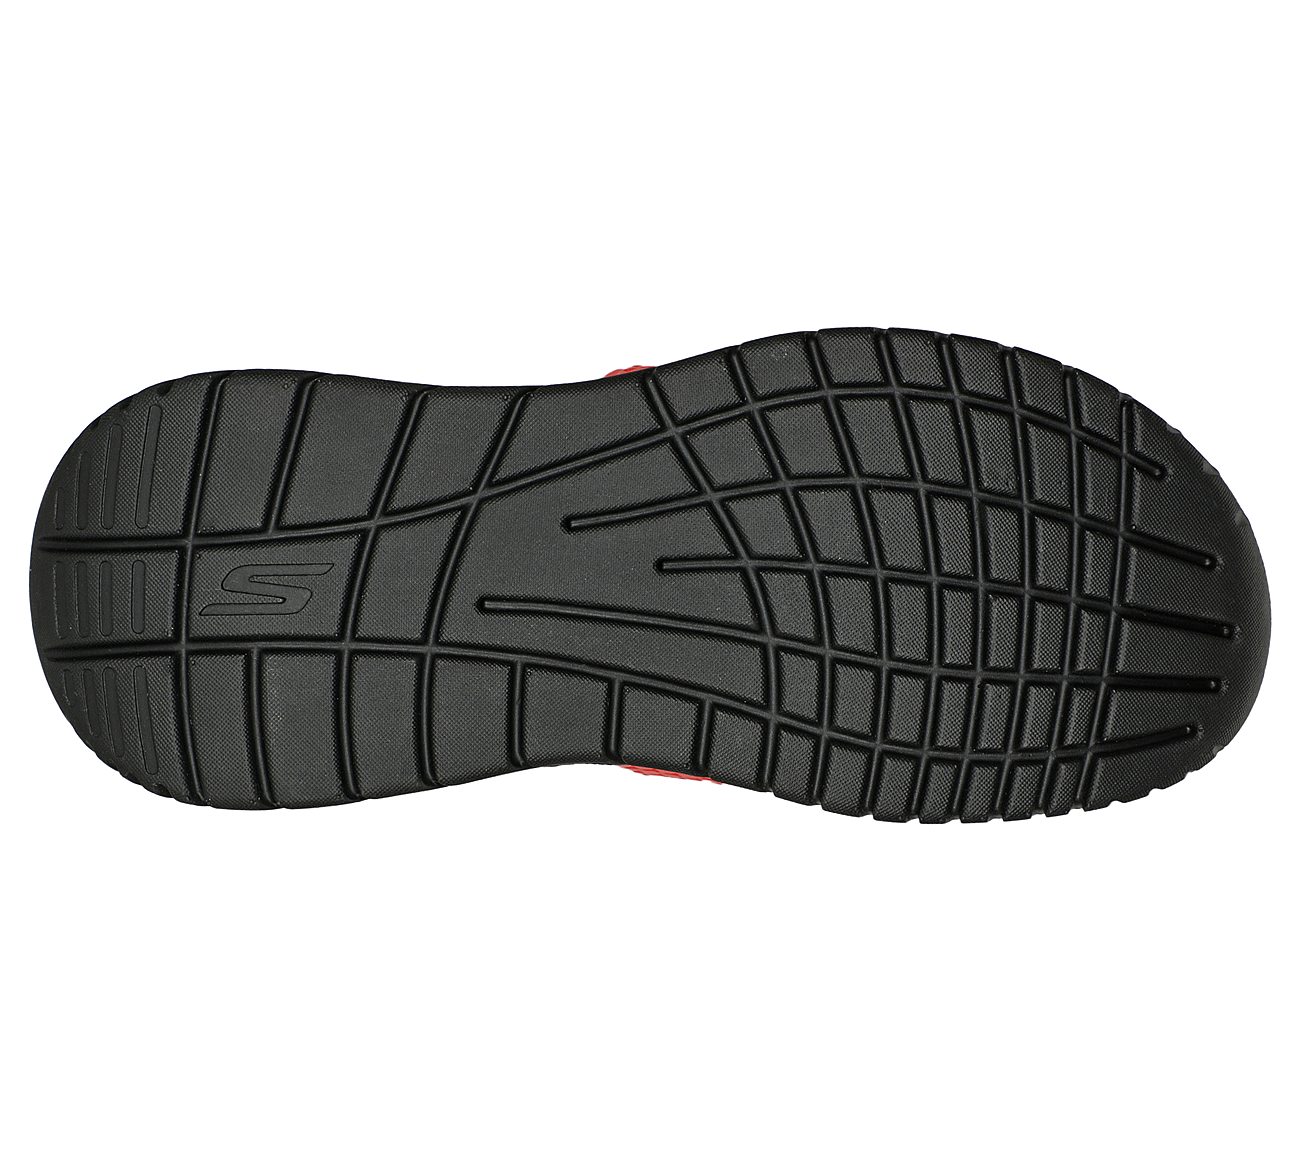 GO RECOVER SANDAL, RED/BLACK Footwear Bottom View